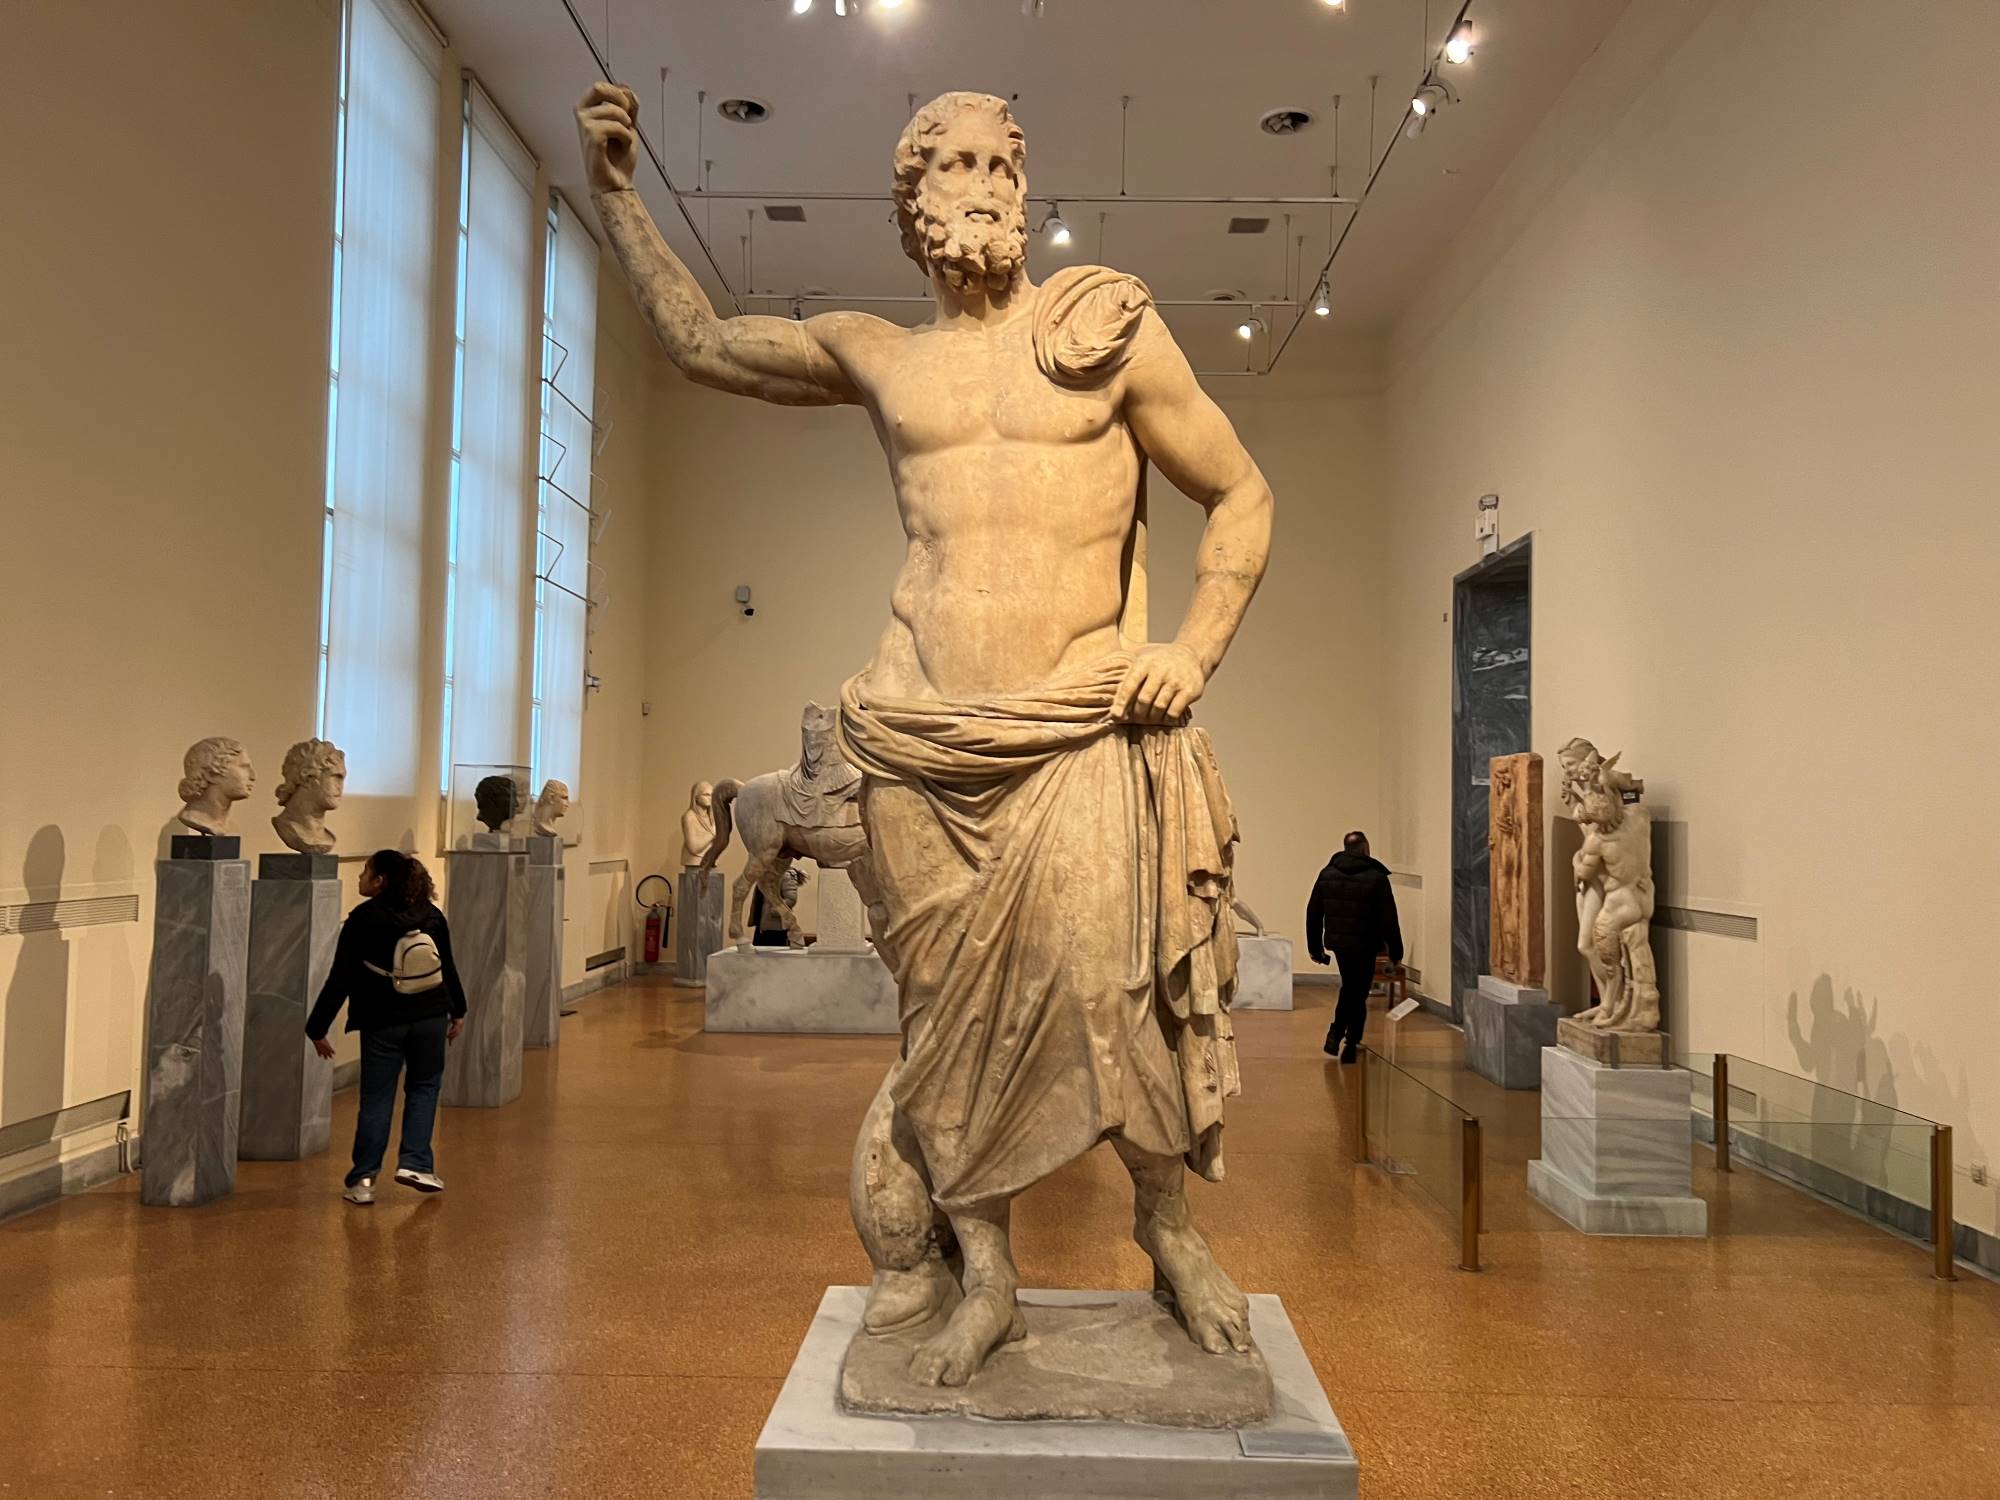 13-fascinating-facts-about-the-poseidon-statue